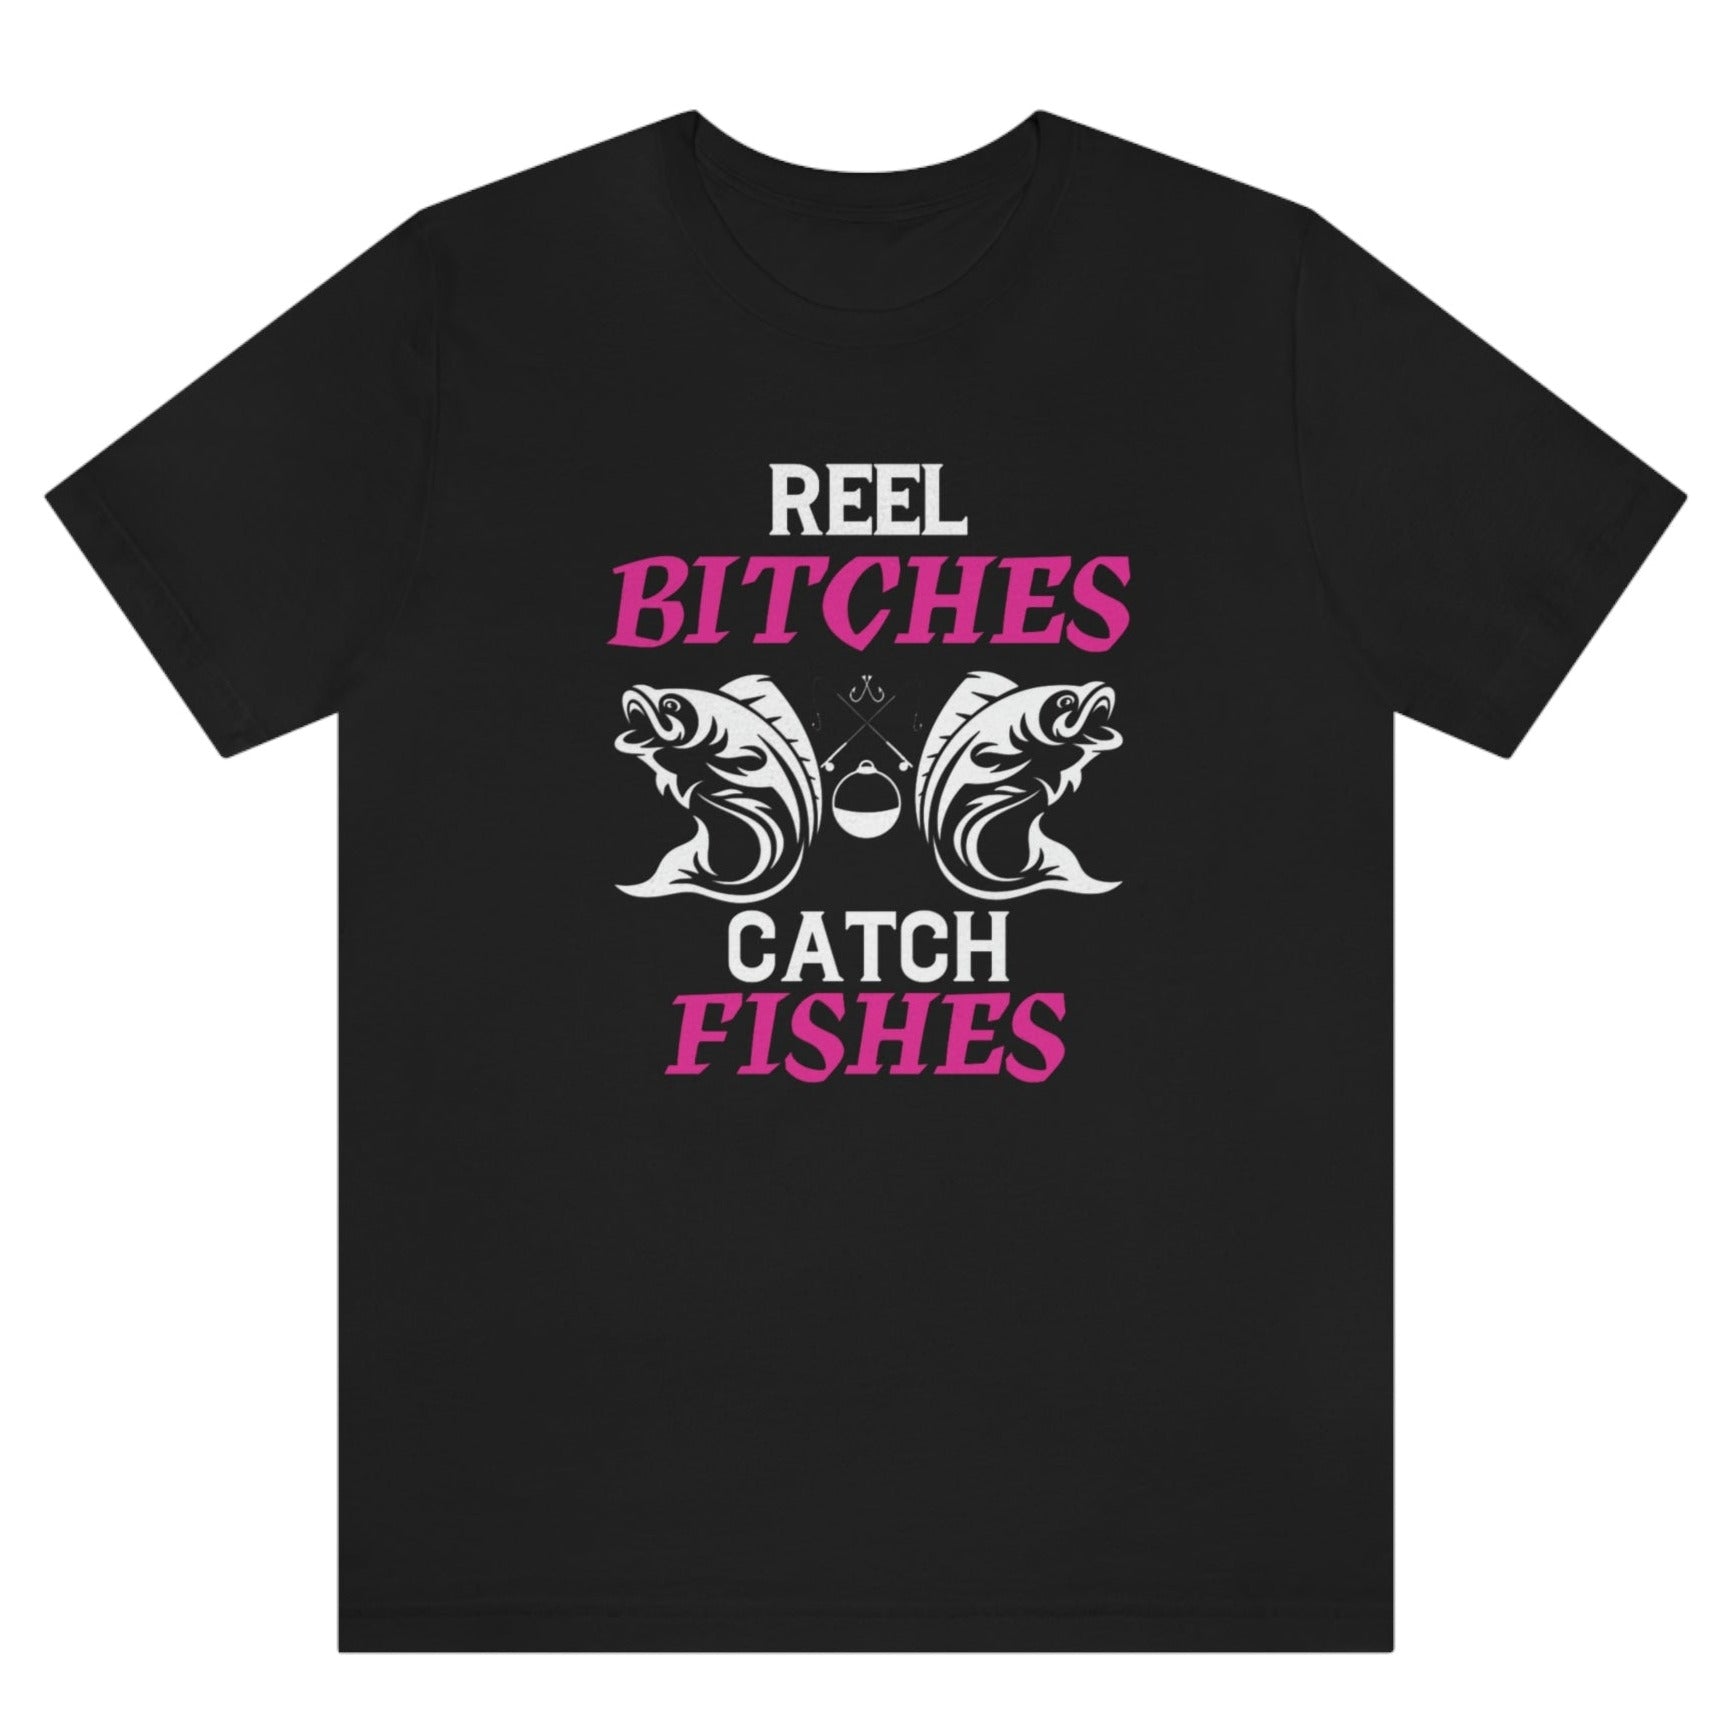 real-bitches-catch-fishes-black-t-shirt-fishing